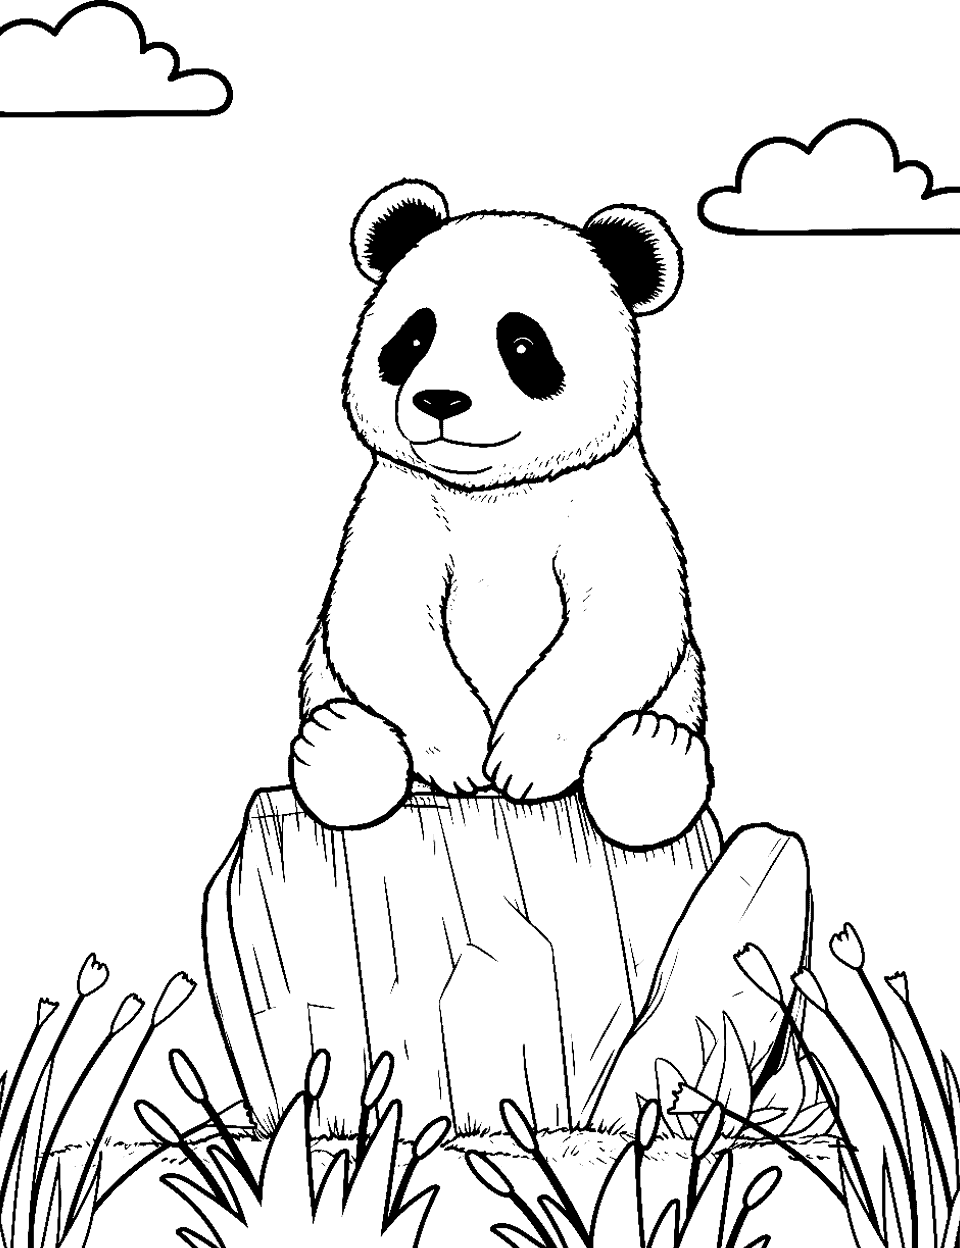 Panda on a Rock Coloring Page - A lonely panda sitting atop a rock, pondering while surrounded by serene nature.